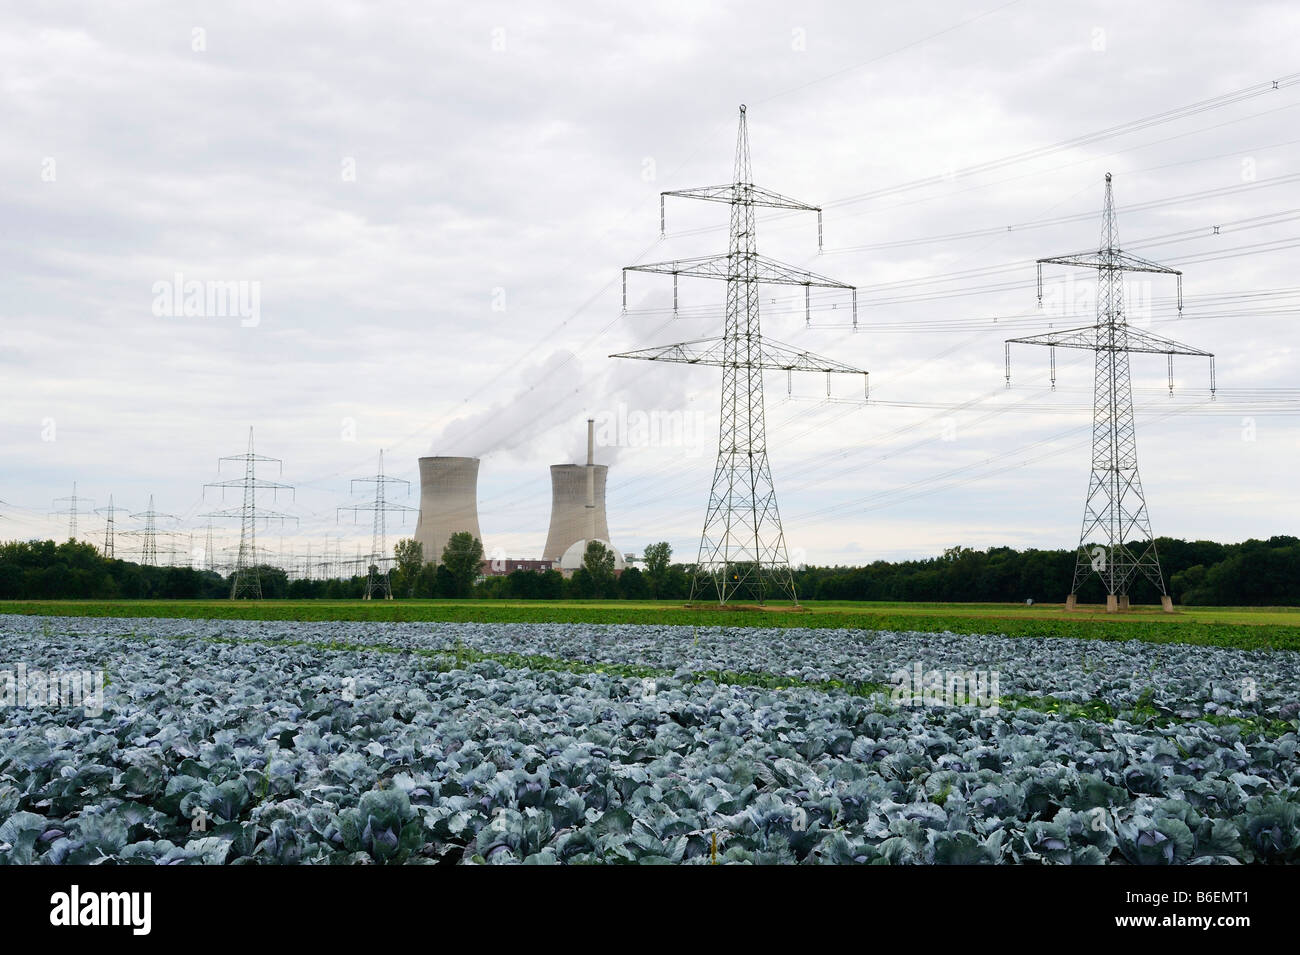 Atomic power station with red cabbage field, Grafenrheinfeld, Lower Franconia, Bavaria, Germany, Europe Stock Photo